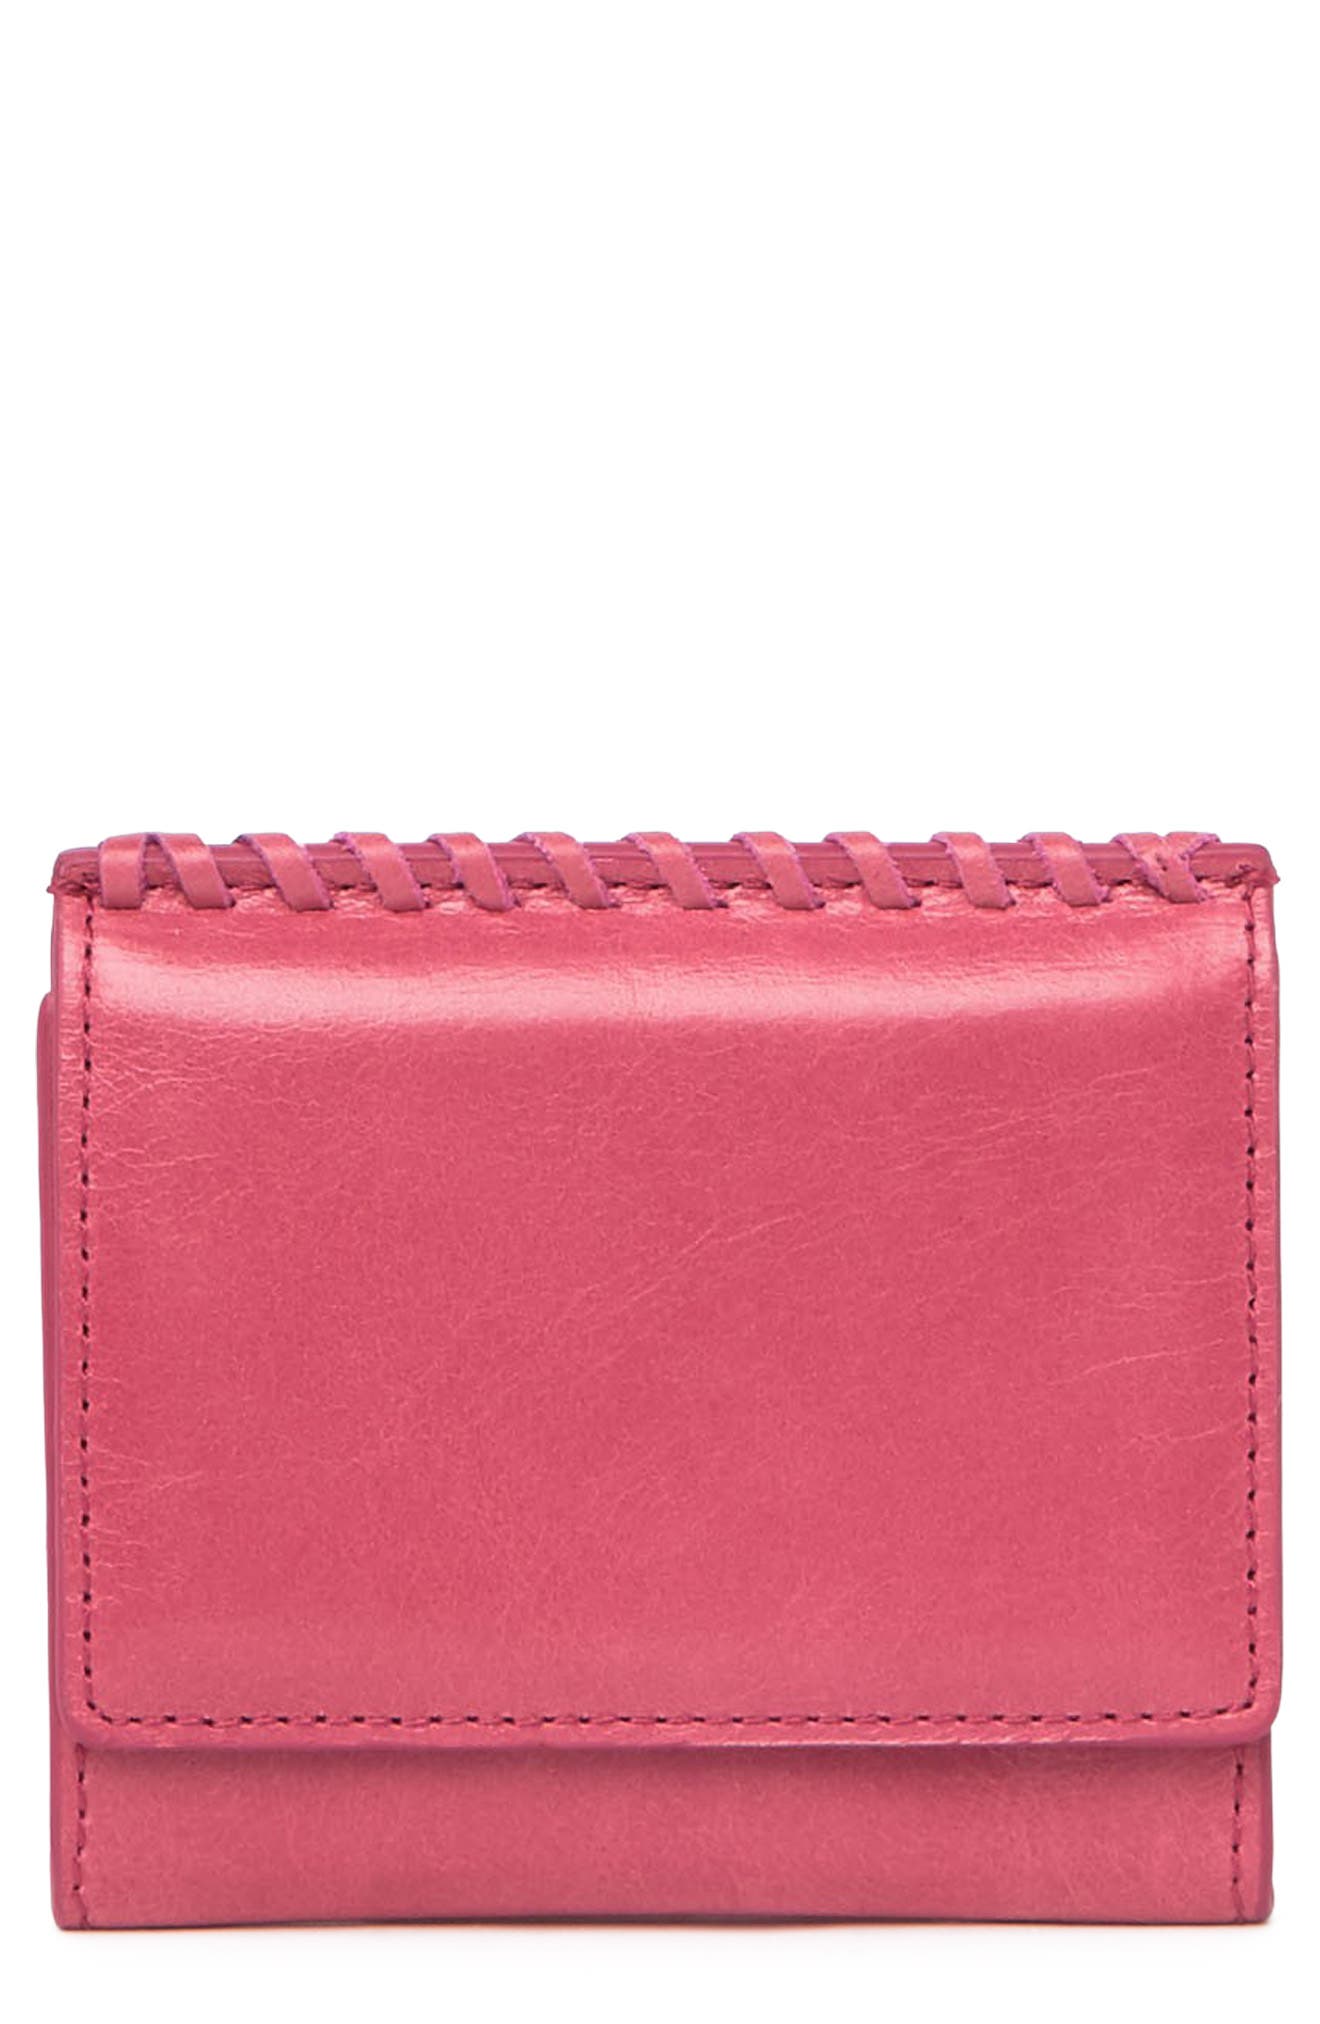 Hobo Stitch Woven Leather Bifold Wallet In Blossom